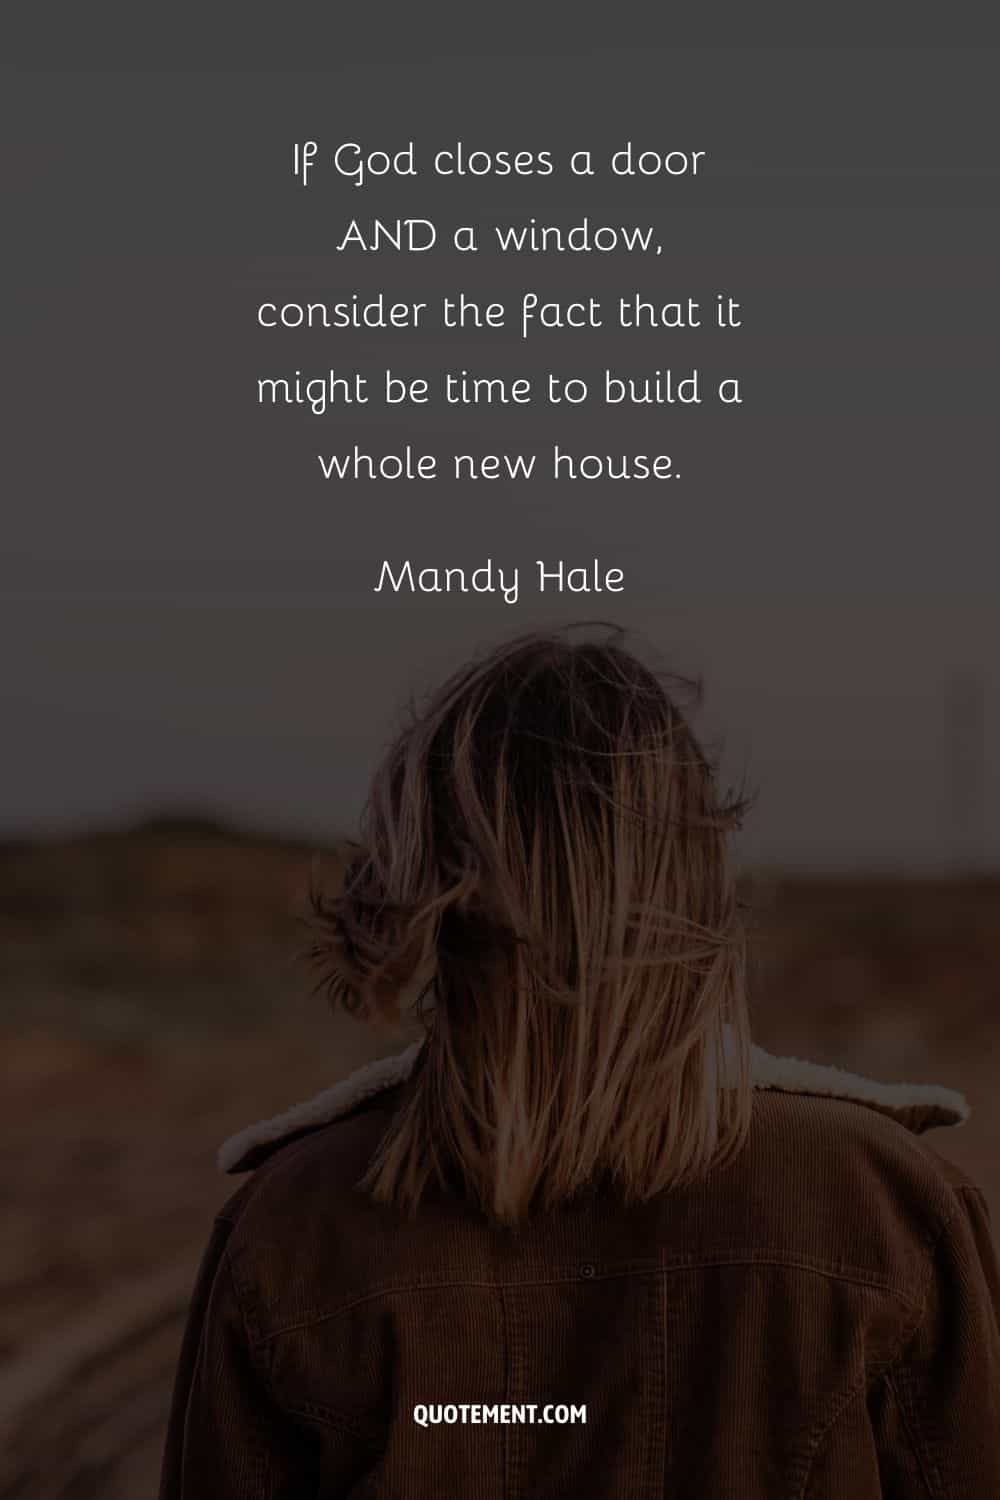 “If God closes a door AND a window, consider the fact that it might be time to build a whole new house.” — Mandy Hale